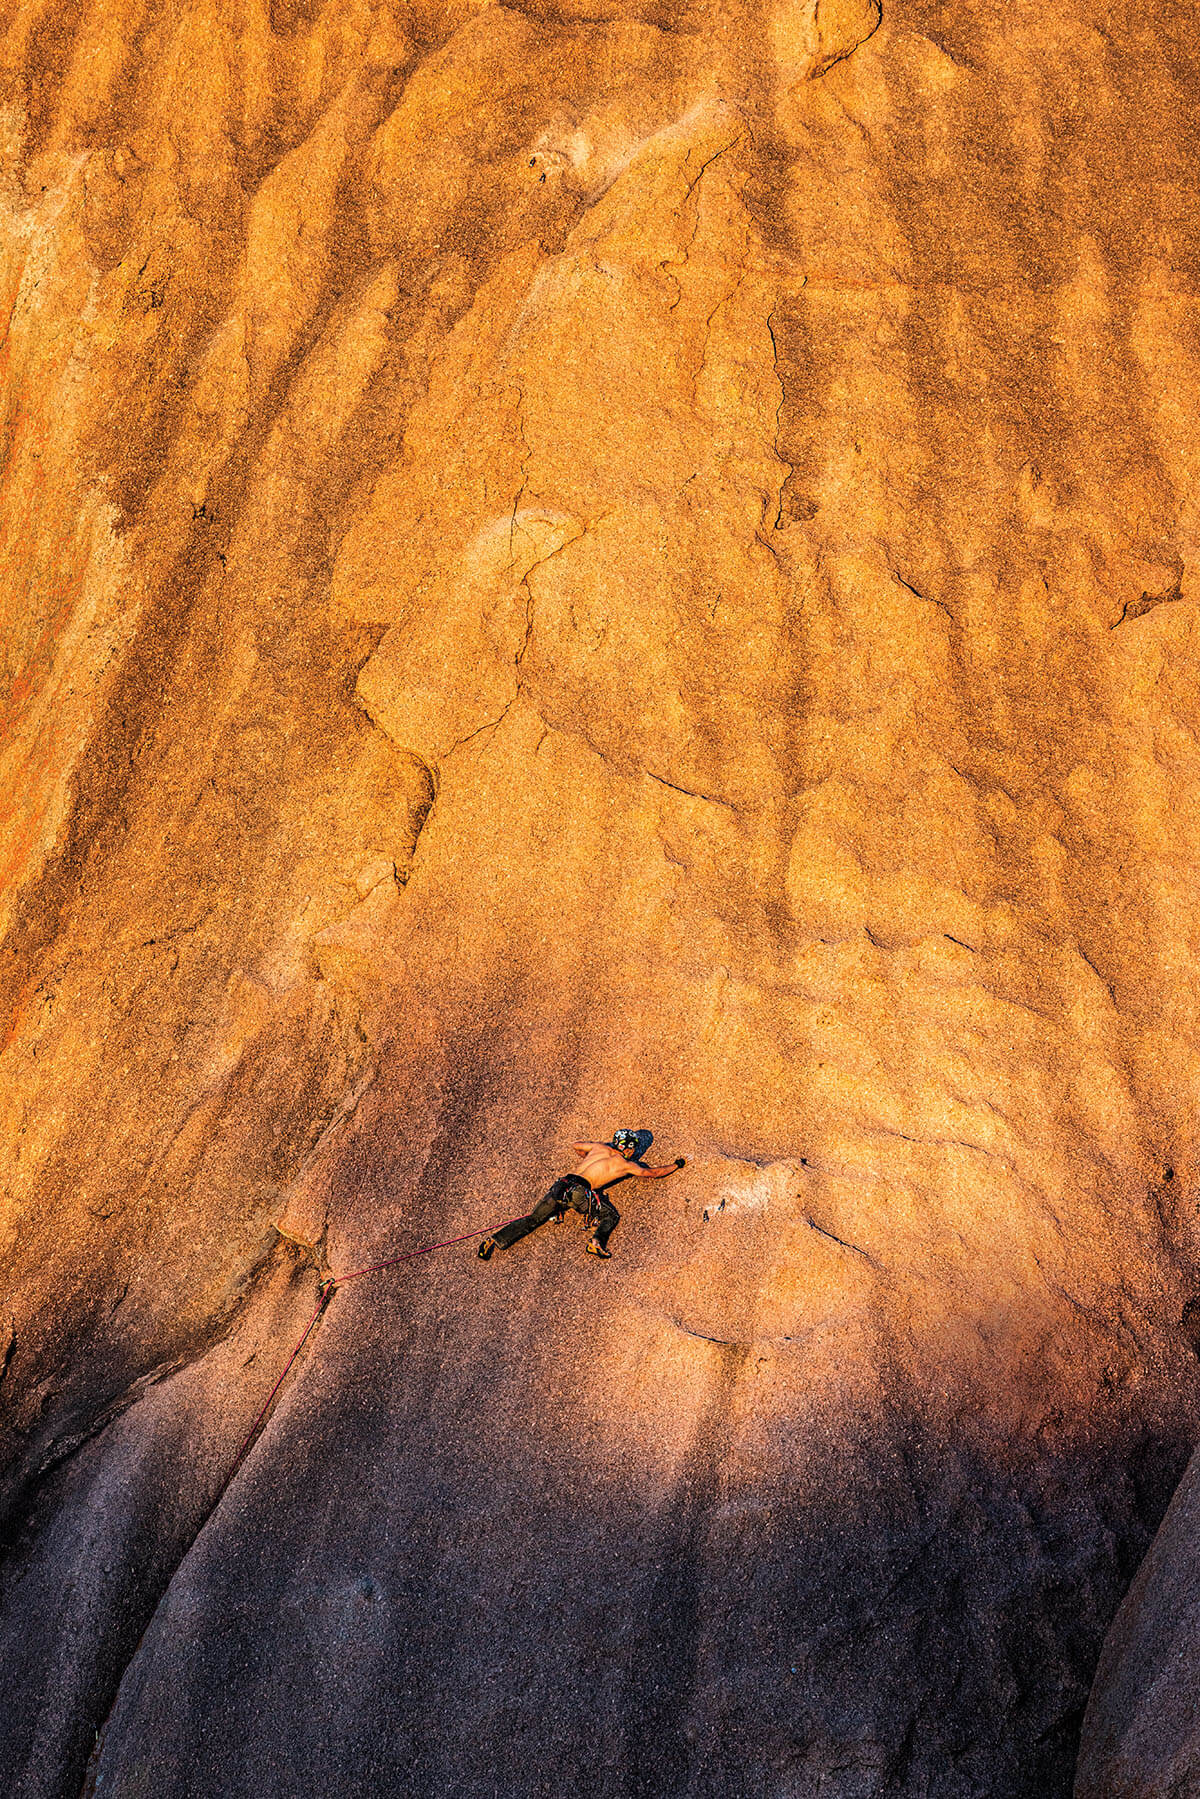 A person scales the side of a large rock face.